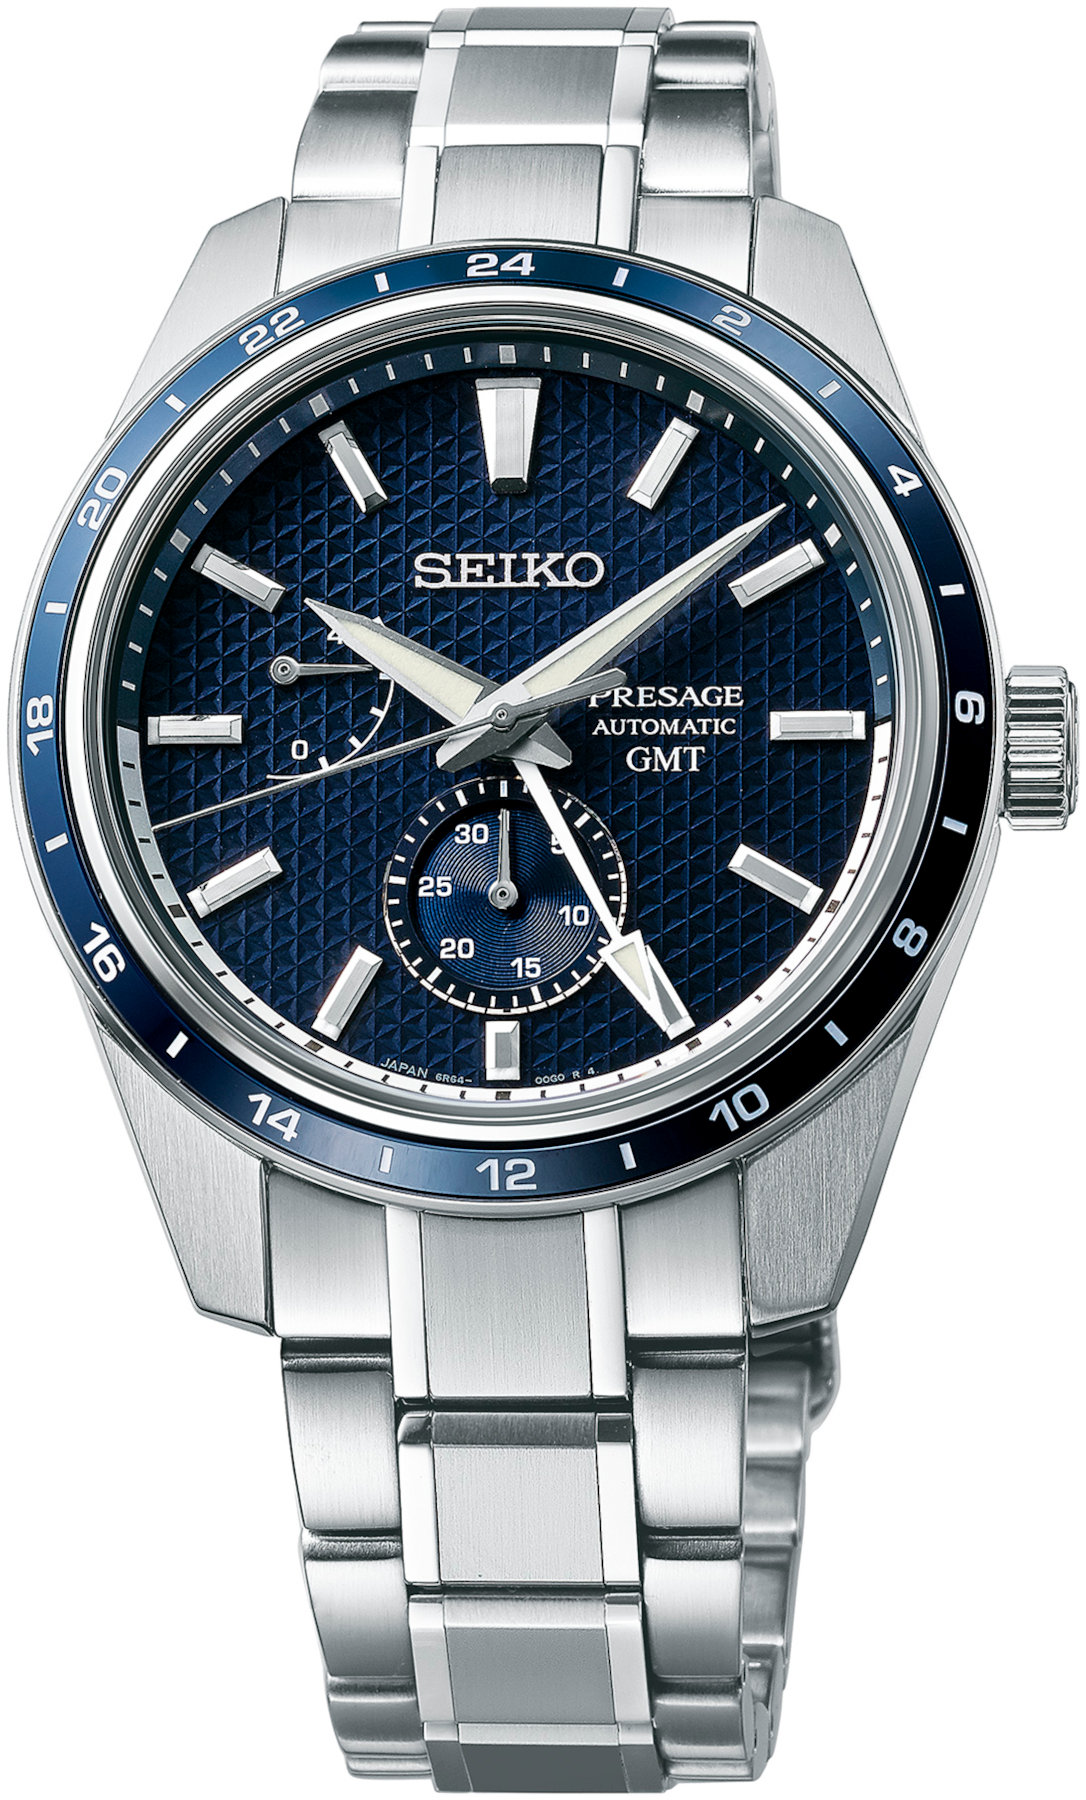 Introducing The Seiko Presage Sharp Edged Series Watches For 2022